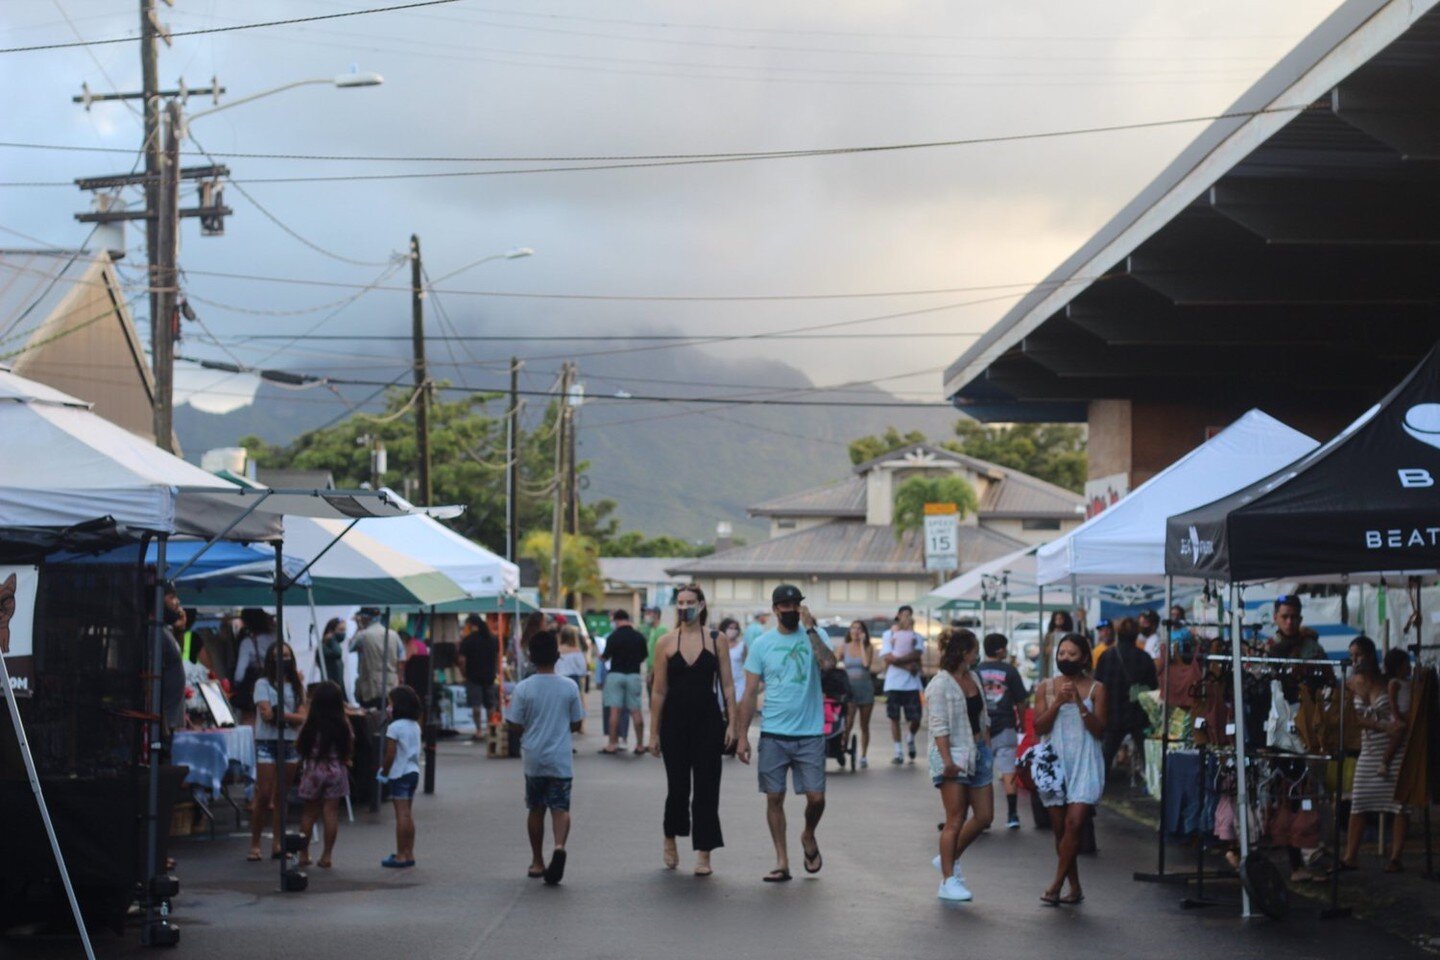 Join us for the last Downtown Lihue Night Market of the year! 

Come out and celebrate the closure of 2022 with good food, local vendors, and live performances by your favorite Kaua'i musicians.  This is the perfect opportunity to pick up last minute